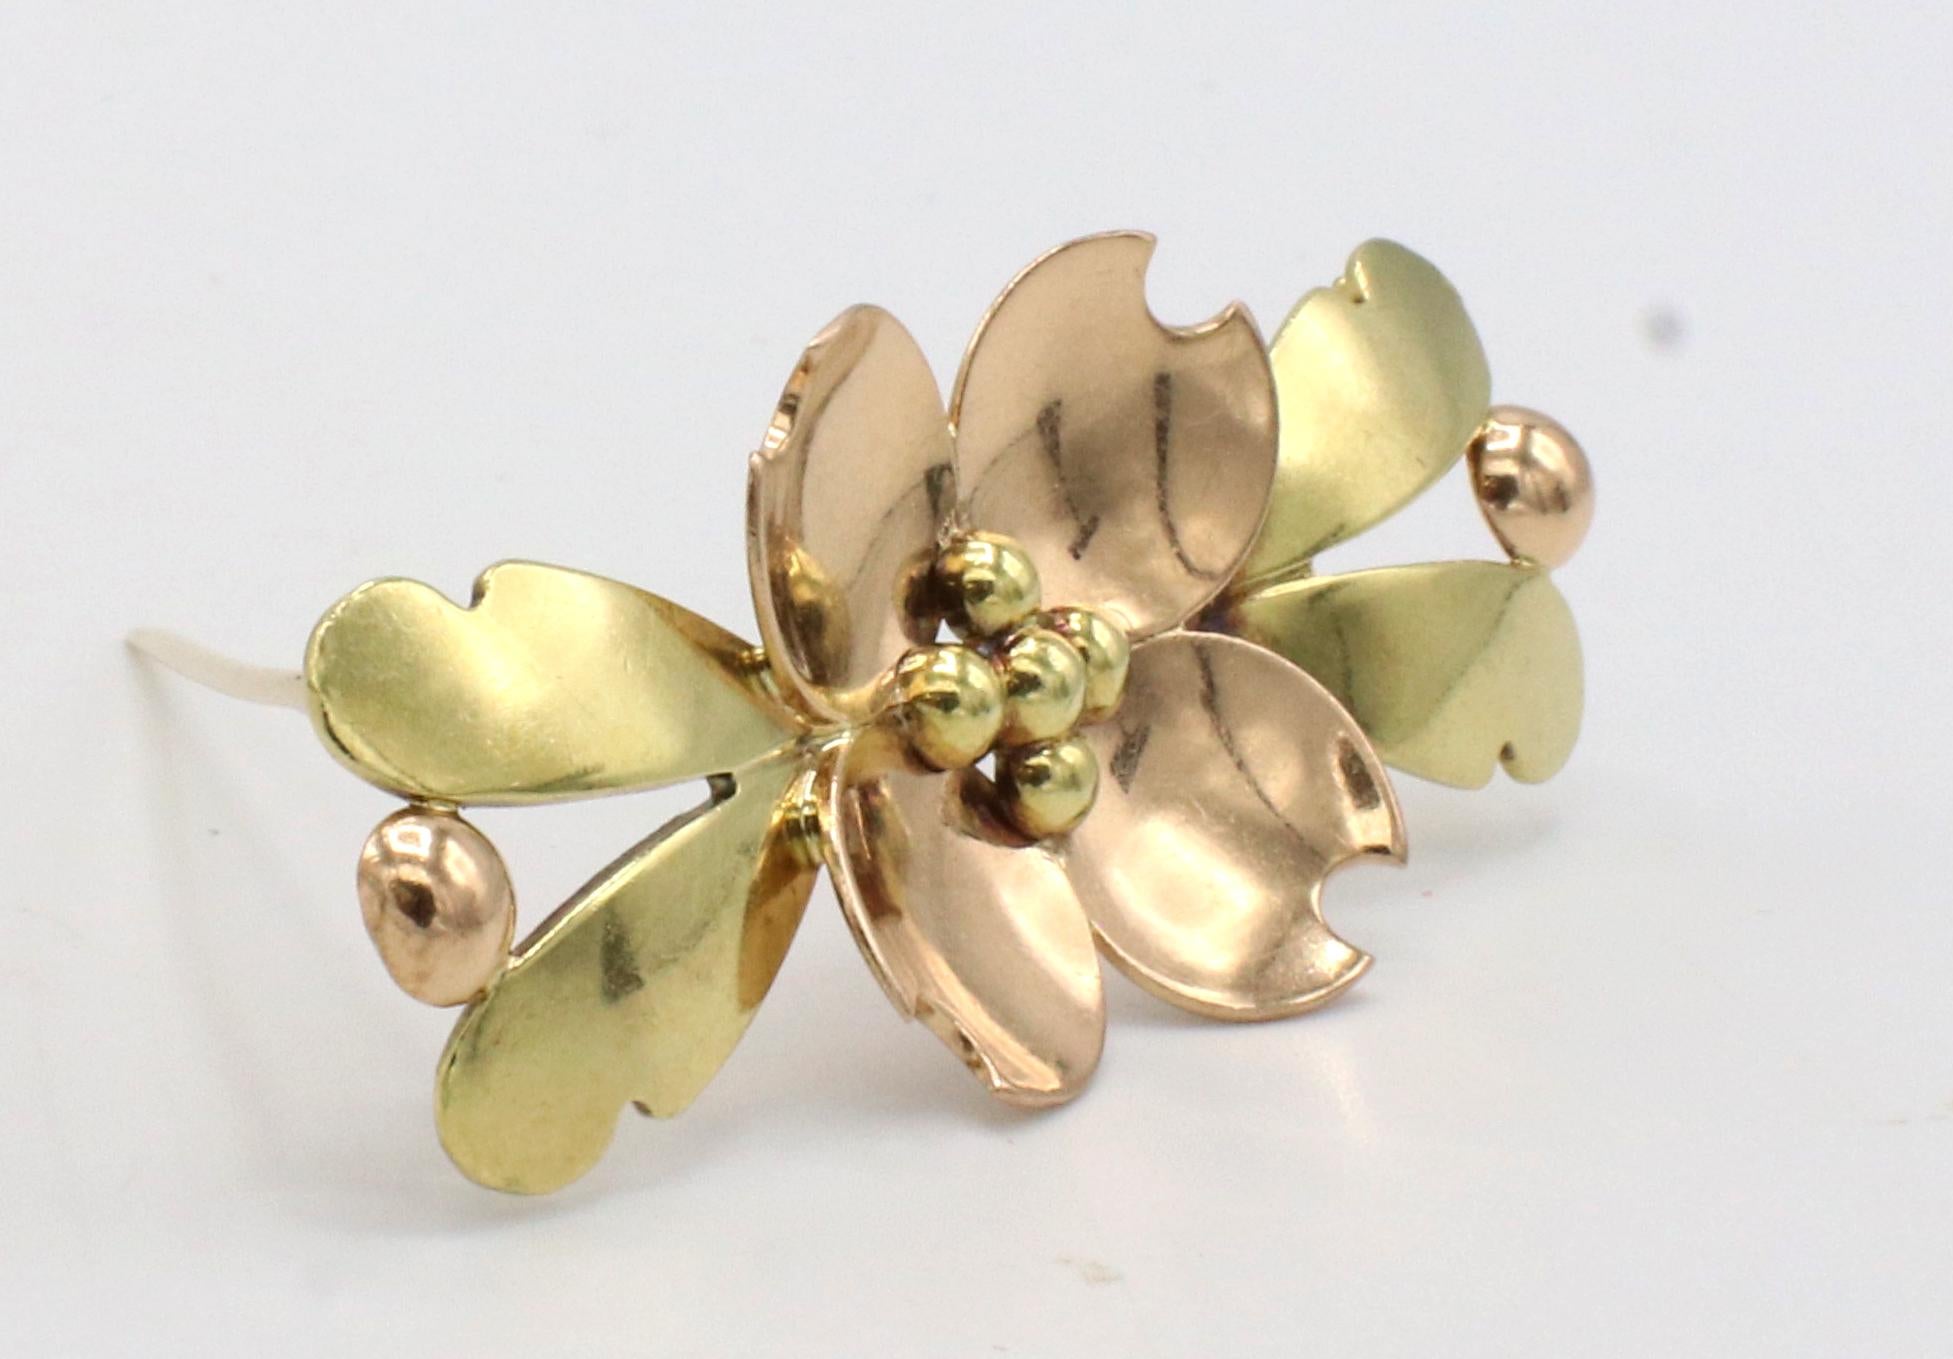 Vintage Tiffany & Co. Pink & Yellow Gold Flower Pin Brooch 
Metal: 14k pink & yellow gold
Weight: 6.97 grams
Length: 20mm
Width: 46mm
Signed: Tiffany & Co. 14k
